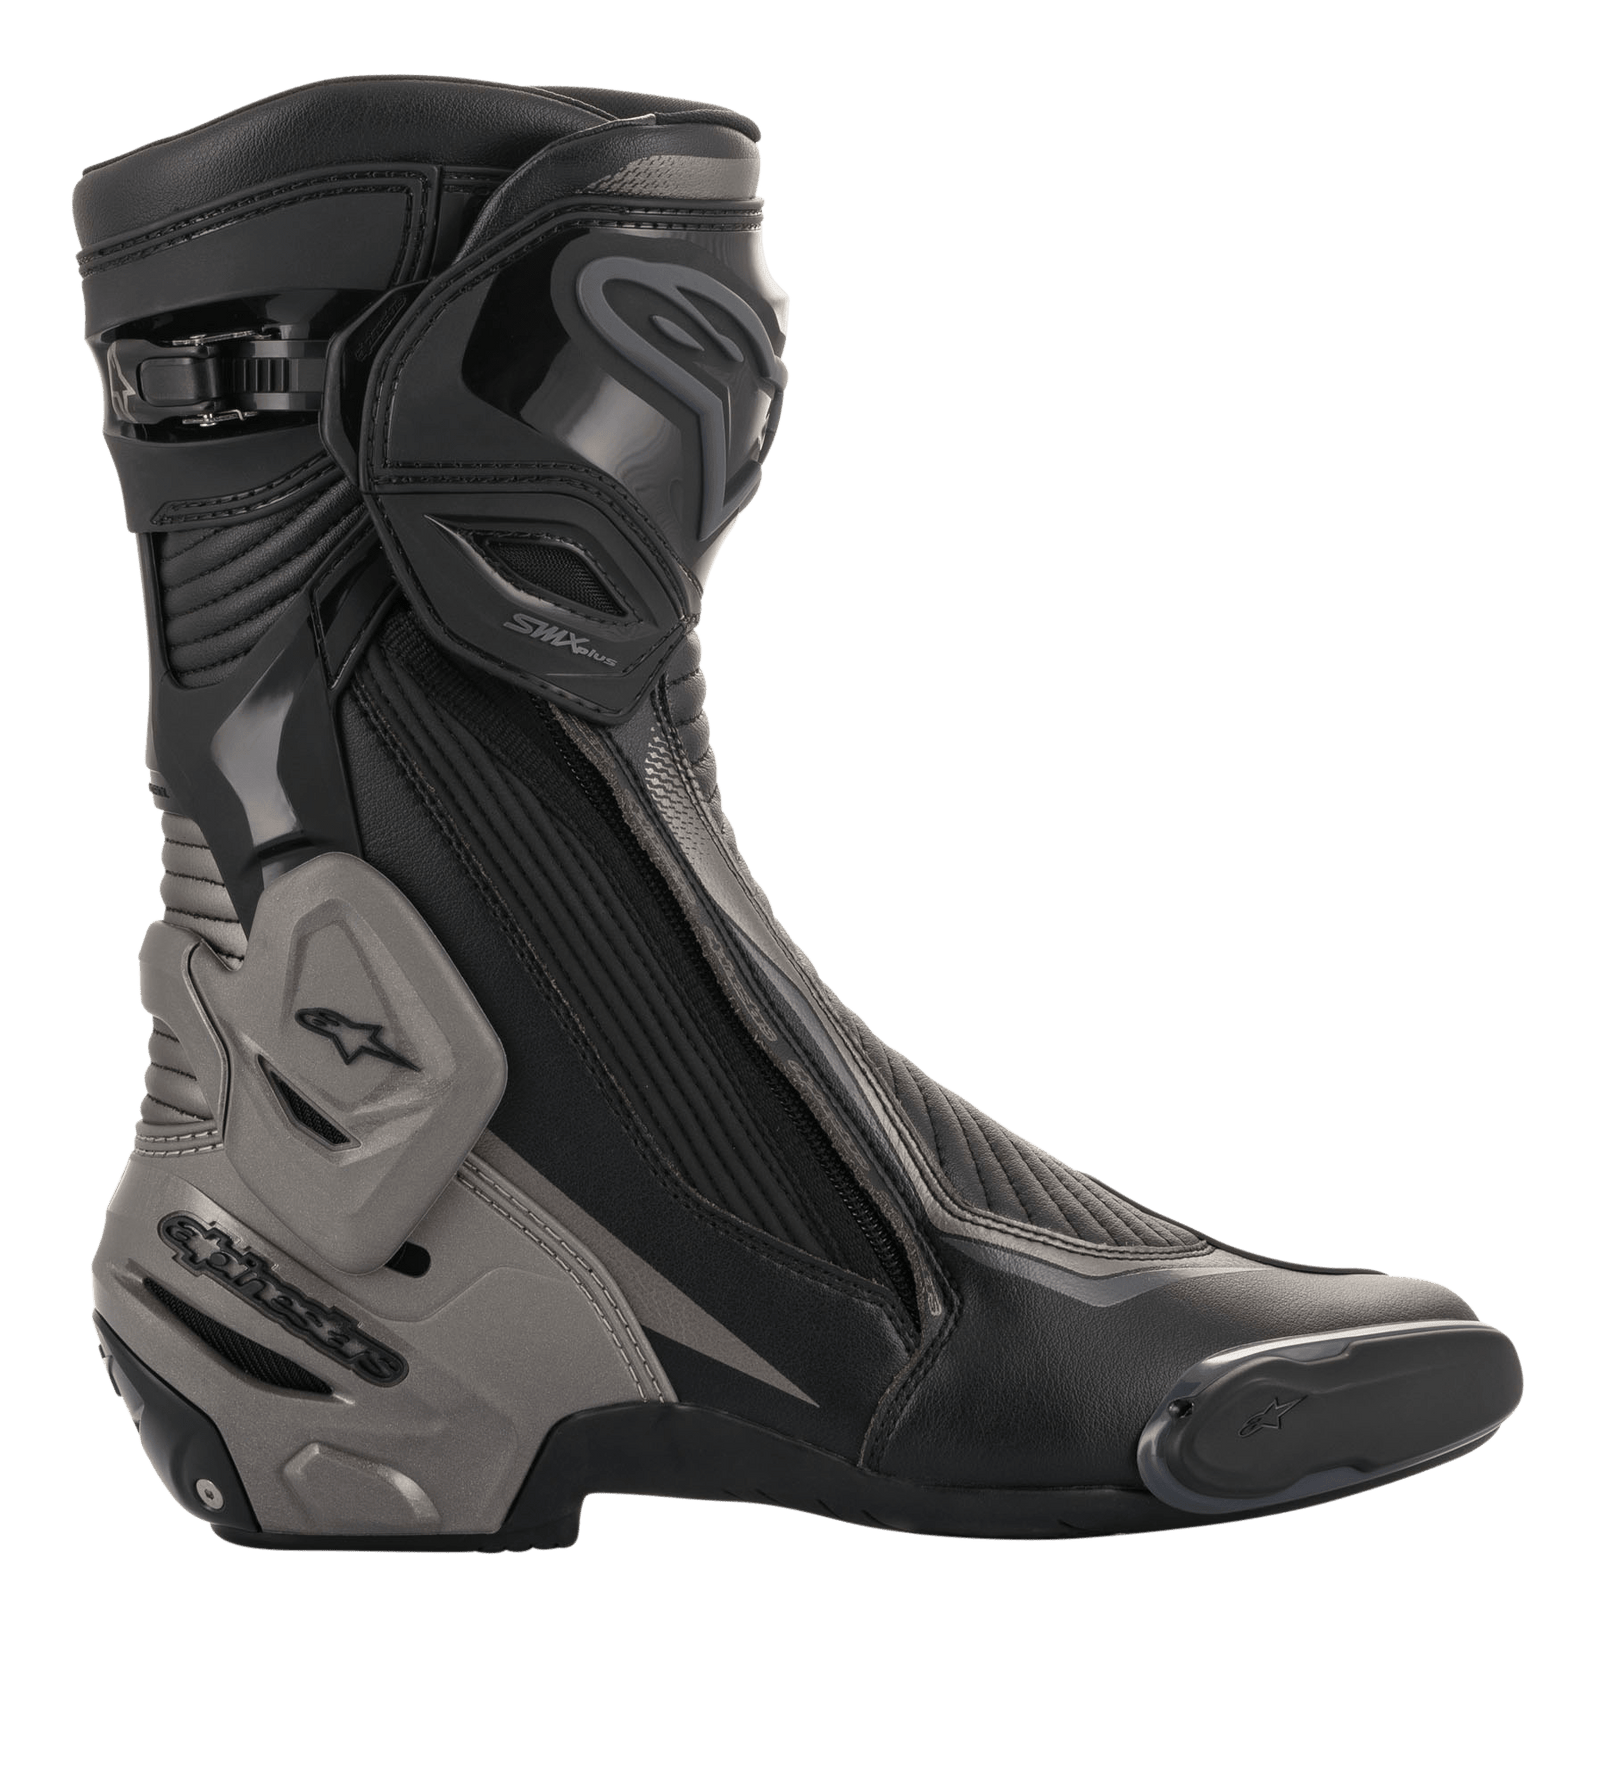 SMX Boots | Alpinestars® Official Site